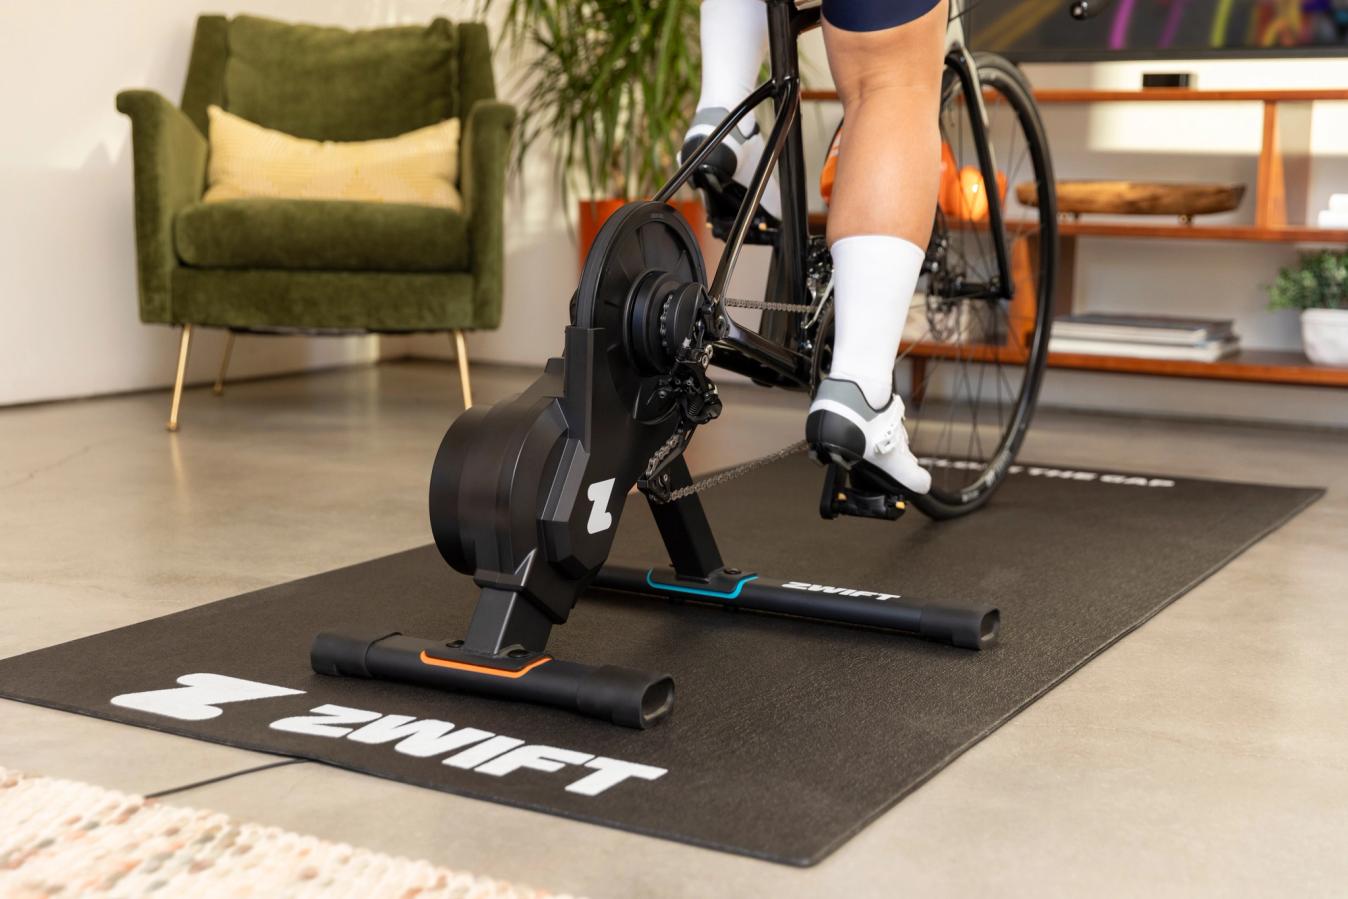 The trainer uses a single cog and simulated virtual gears controlled by a remote shifter